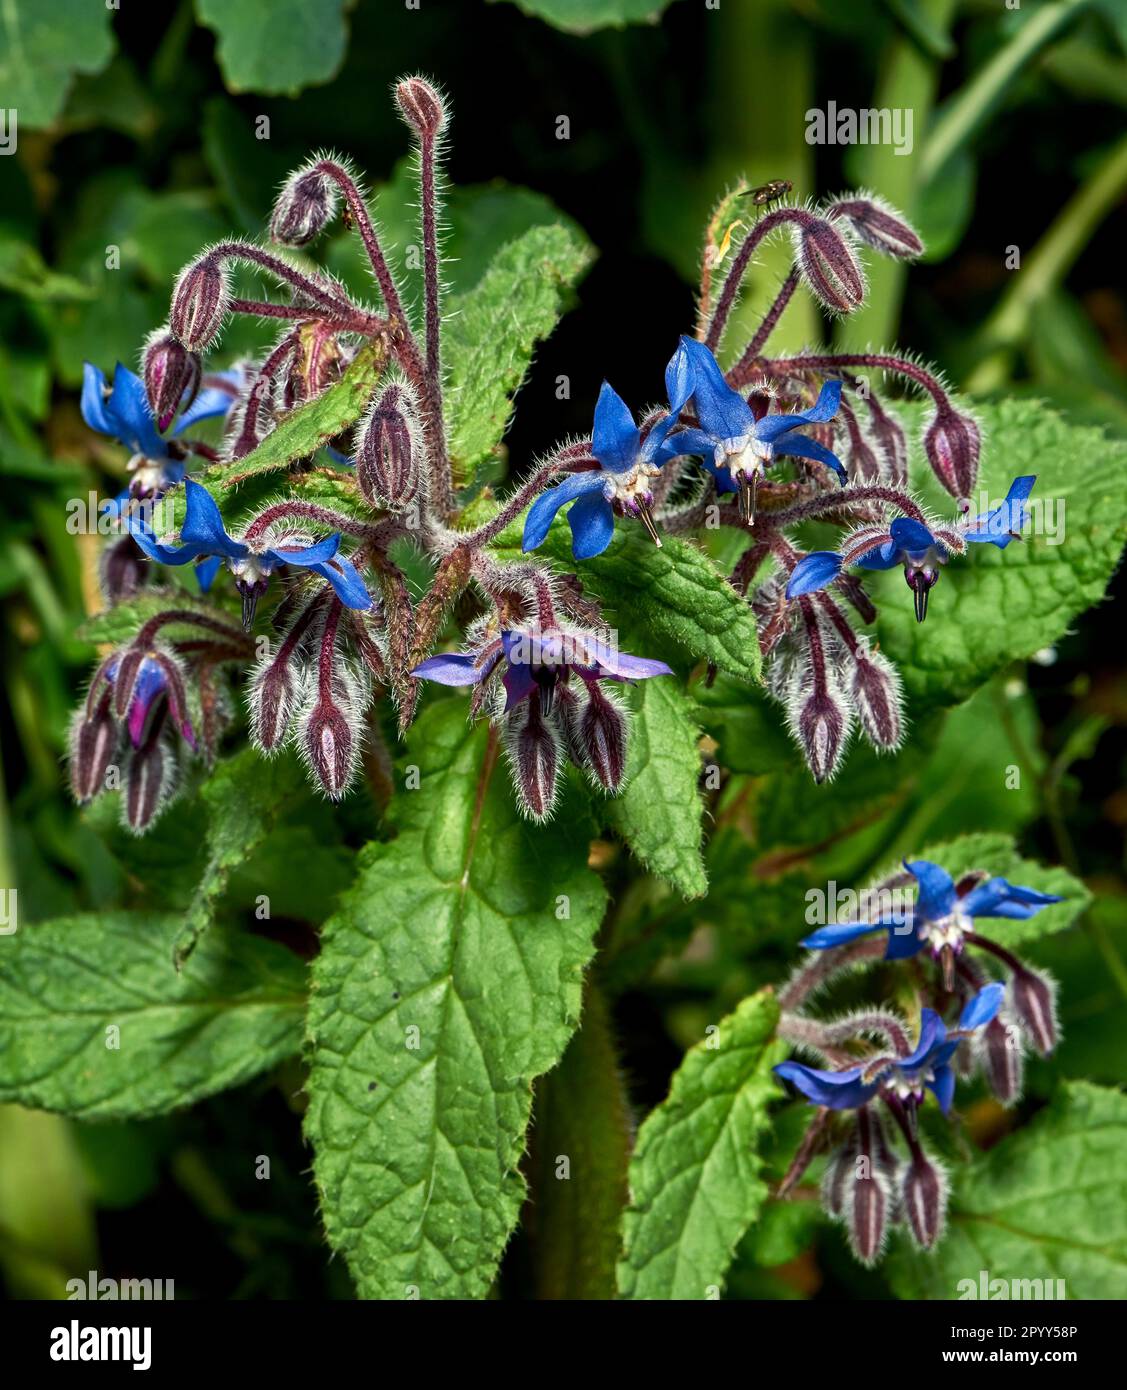 Borage, also known as starflower, is an annual herb in the flowering plant family Boraginaceae. Stock Photo